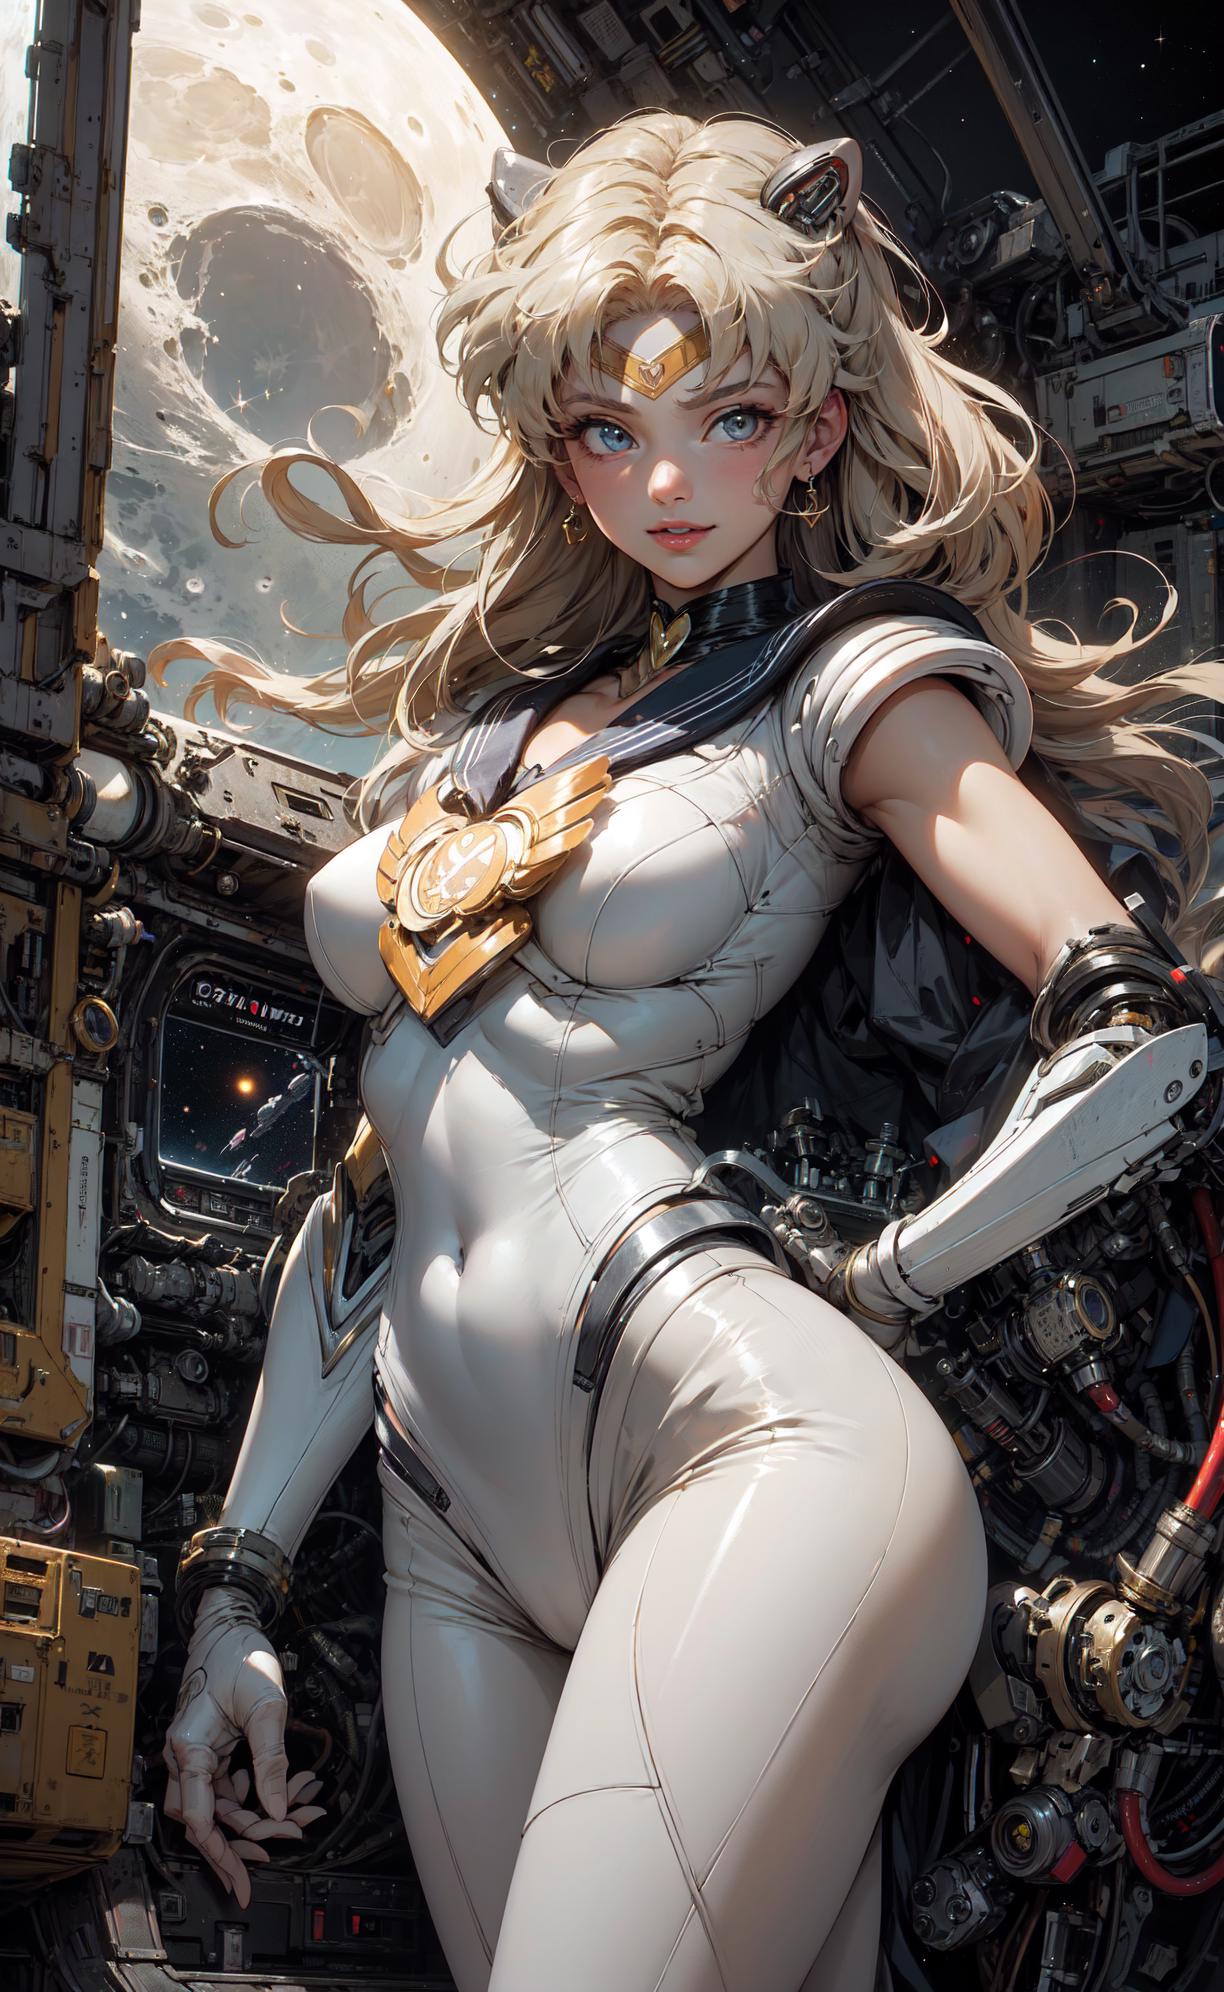 Anime-style female character with blonde hair, wearing a white suit and a black cape, standing in front of a space ship.